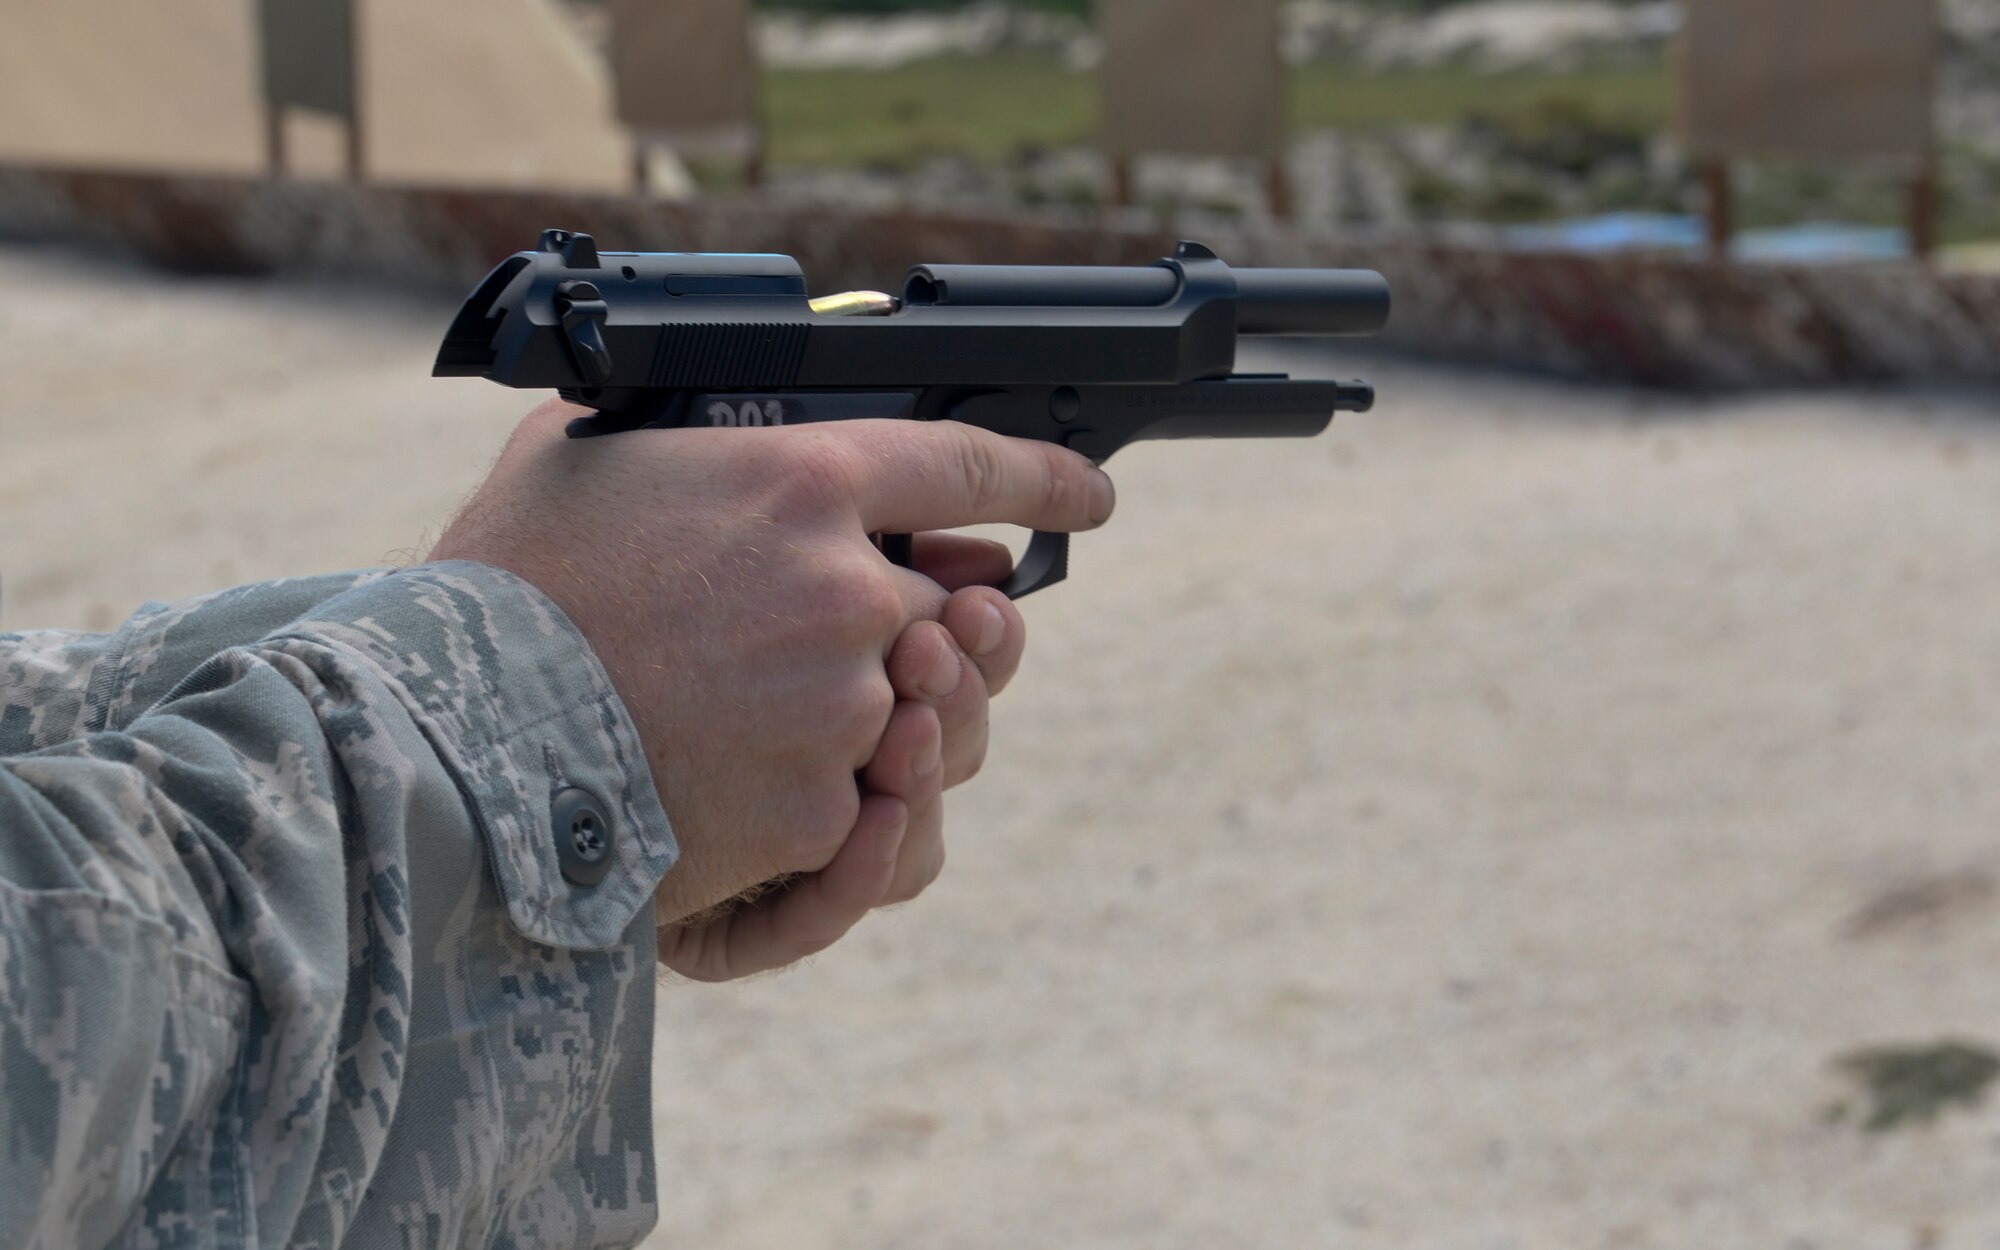 Staff Sgt. Travis Straw, 644th Combat Communications Squadron cyber system technician, reloads his M9 pistol before firing downrange Sept. 1, 2015 at the Combat Arms Training and Maintenance range on Andersen Air Force Base, Guam. The CATM mission is to ensure all weapons utilized by 36th Wing members are functional, maintained and ready when the Airmen are called to duty. (U.S. Air Force photo by Staff Sgt. Robert Hicks/Released)